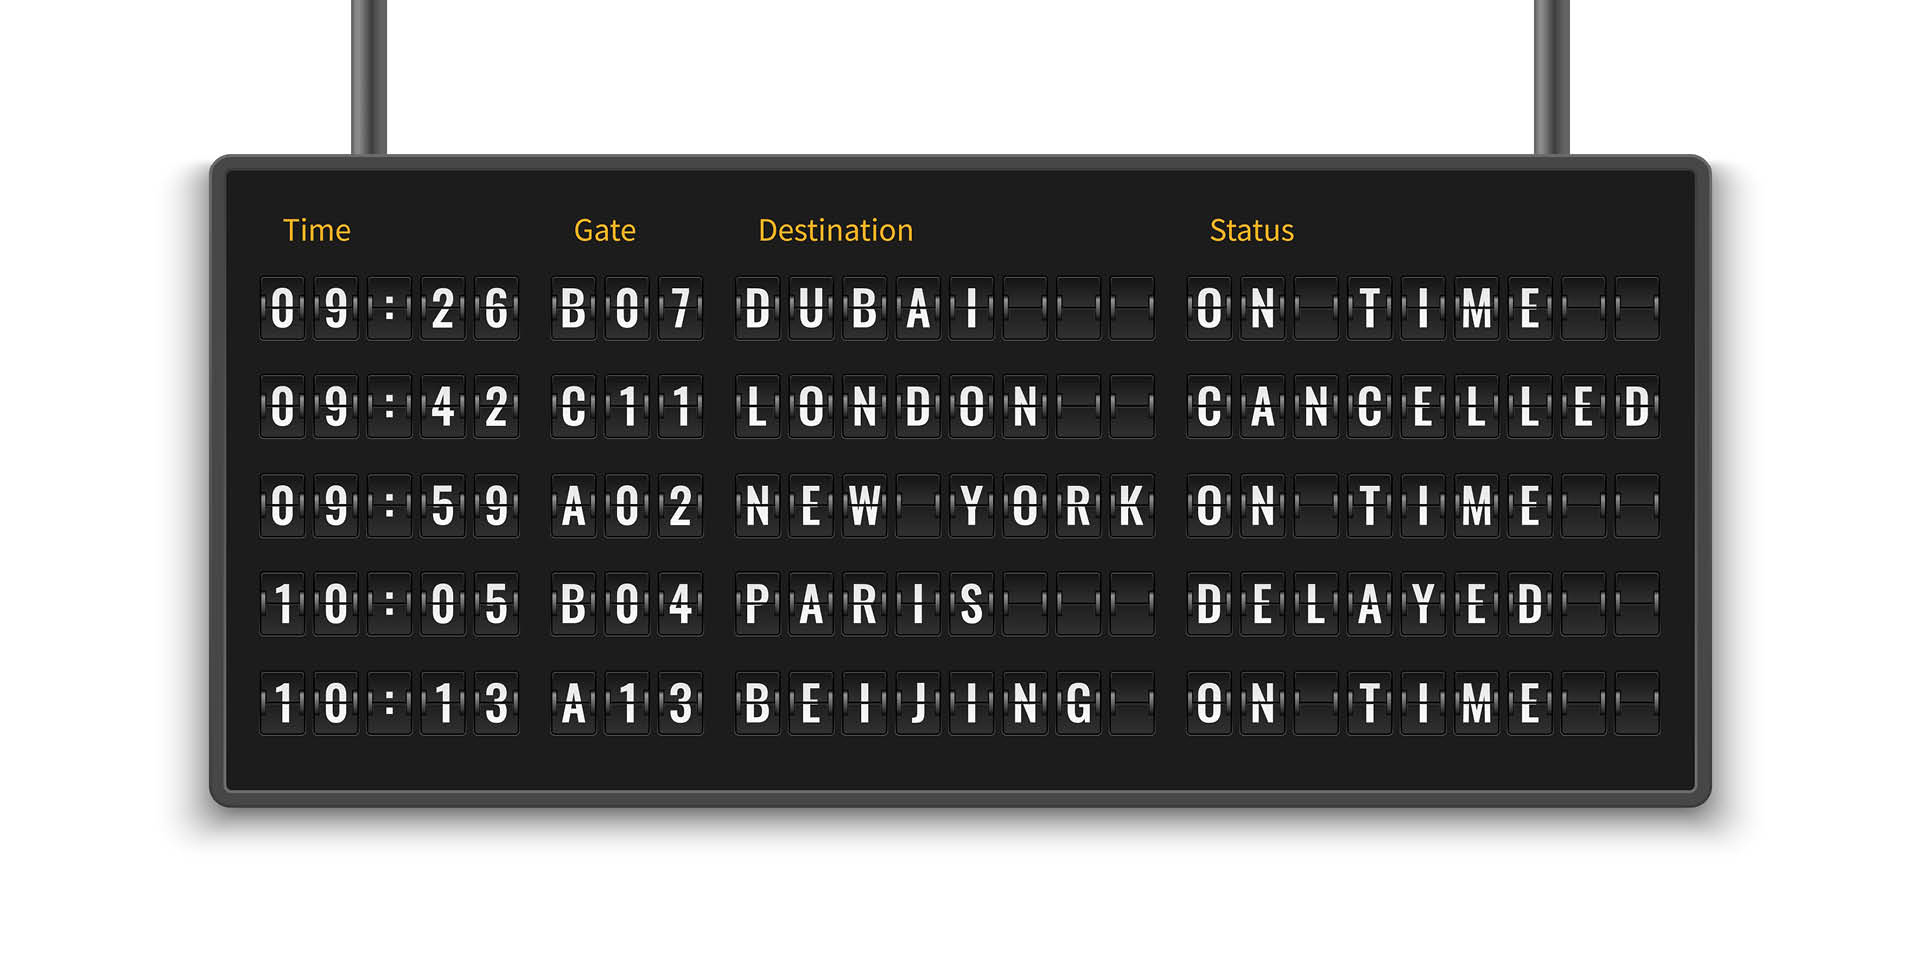 A photo illustration shows an airport info panel displaying departures for flights, one of which is delayed, one is canceled, and three are on time.